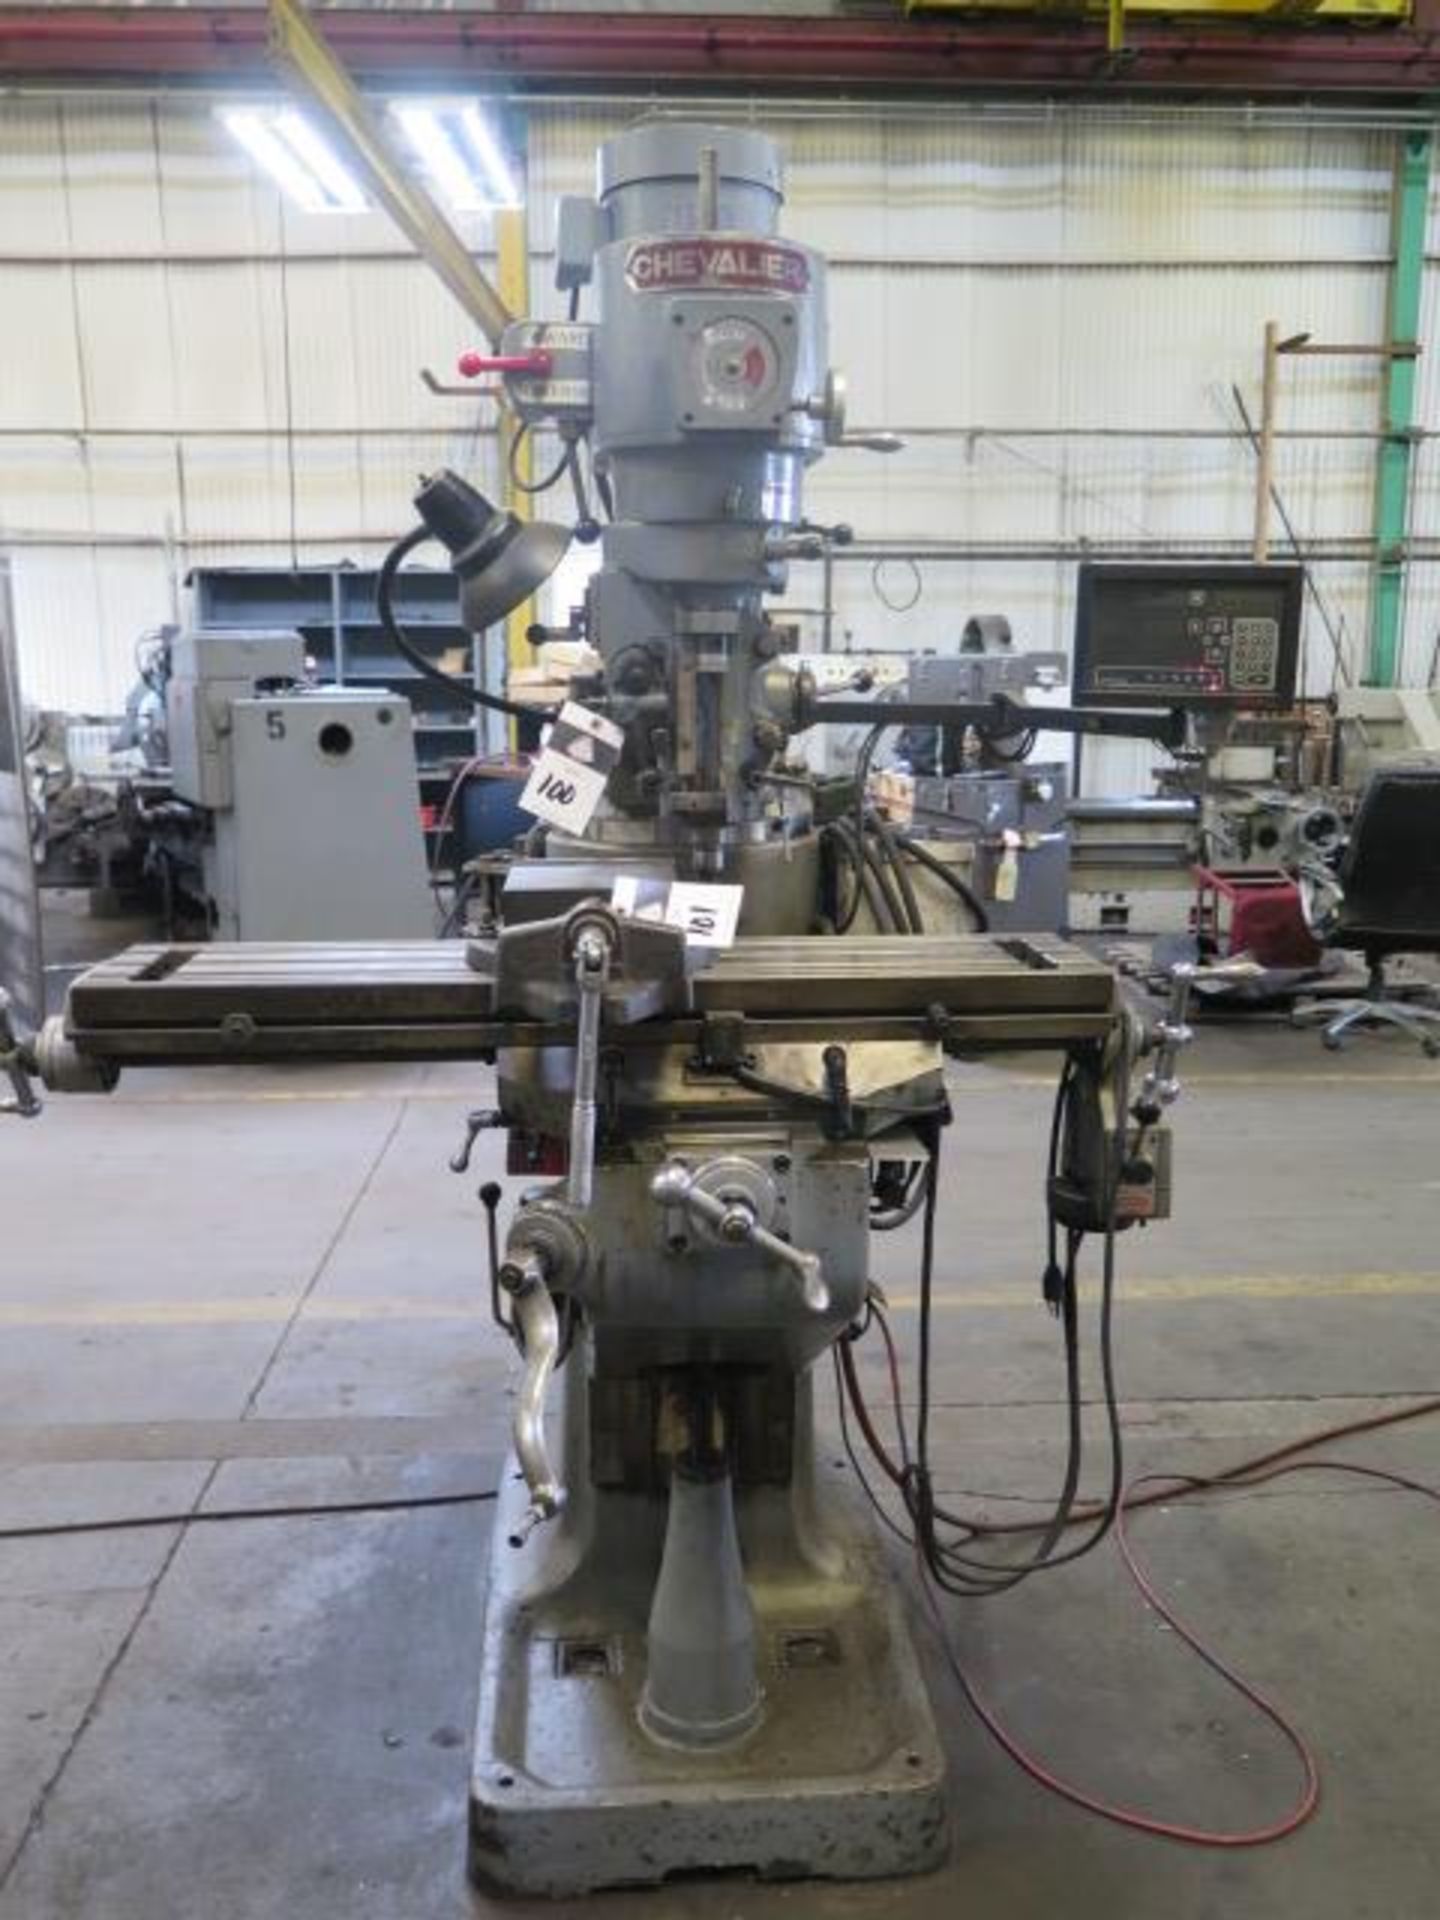 Chevalier Vertical Mill s/n 828286 w/ Newall DP700 Program DRO, 60-4500 Dial Change RPM, SOLD AS IS